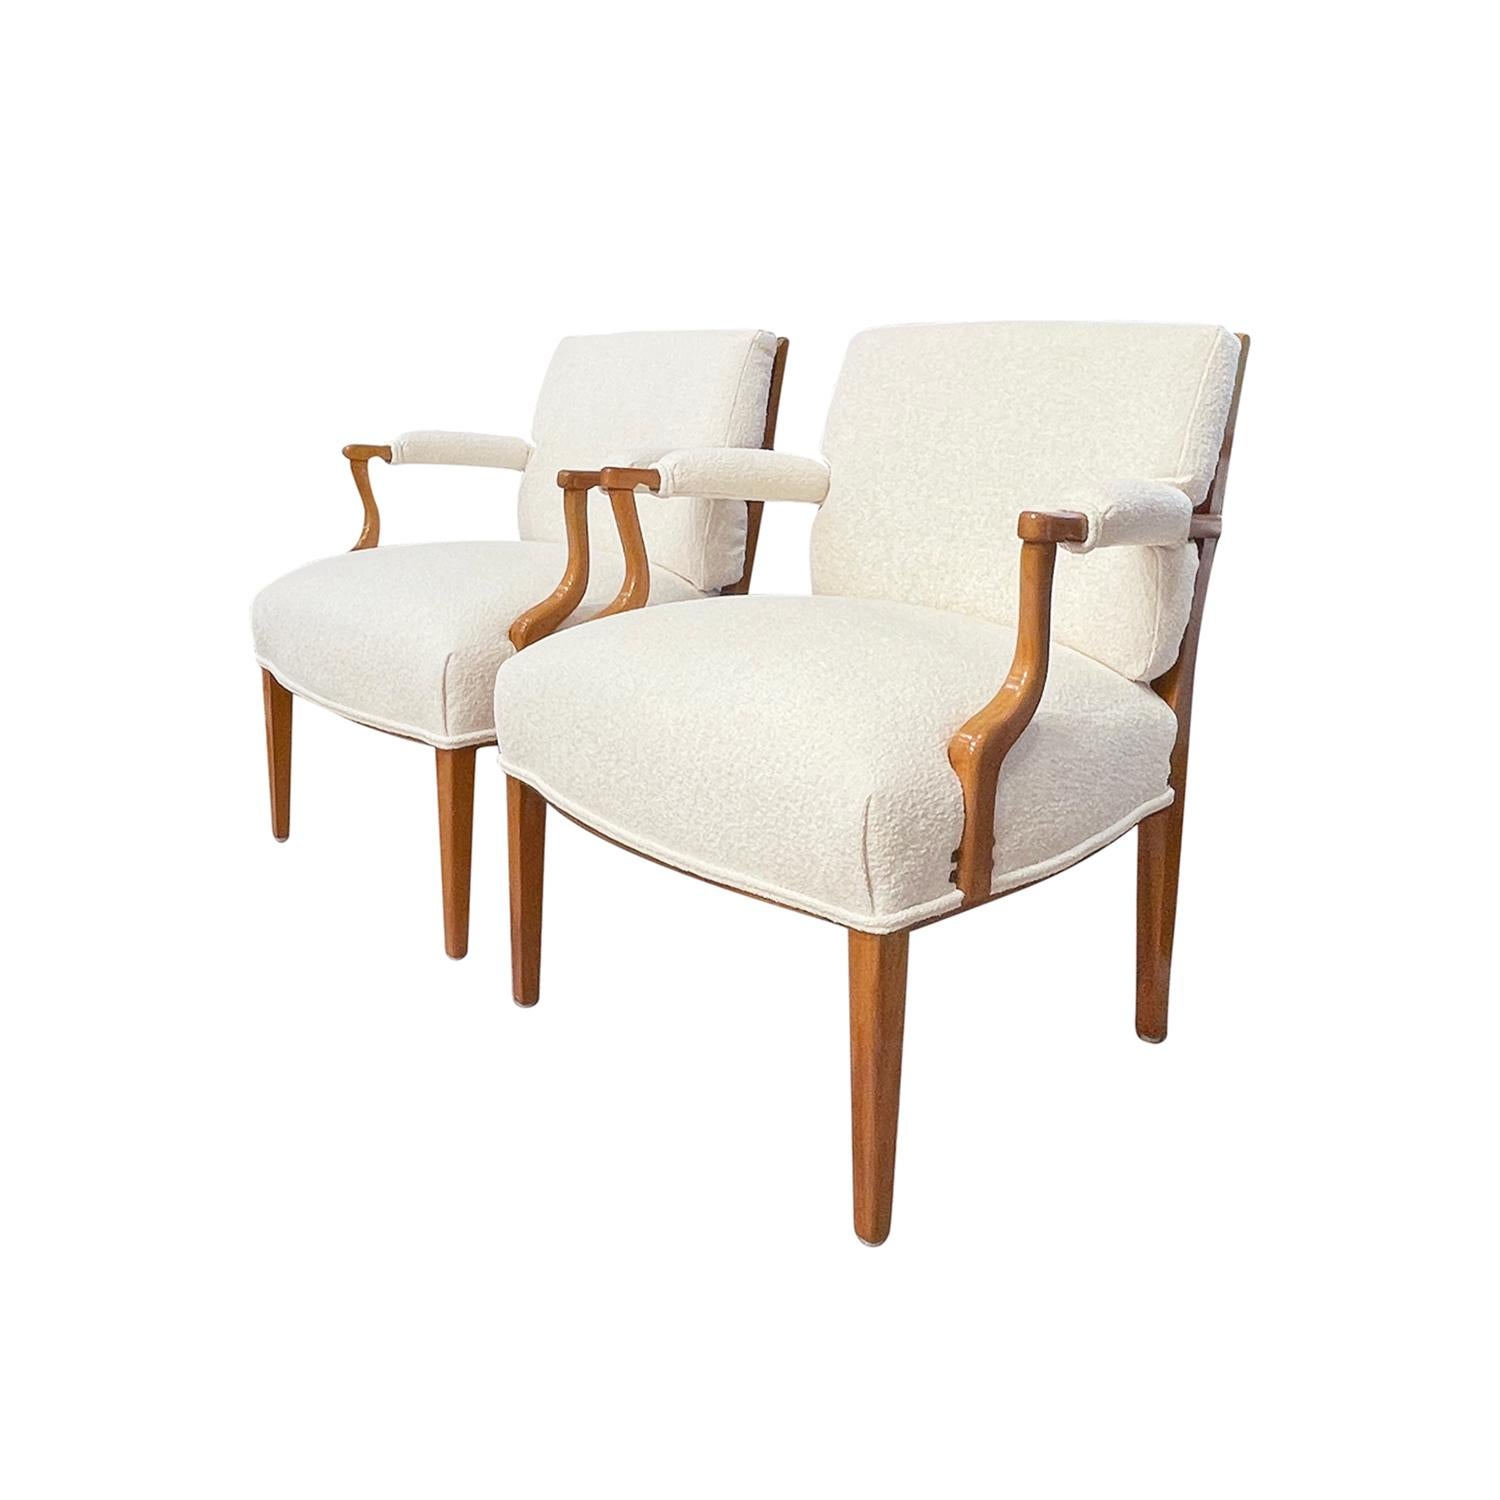 Hand-Carved 20th Century Swedish Vintage Svenskt Tenn Pair of Beech Armchairs by Josef Frank For Sale